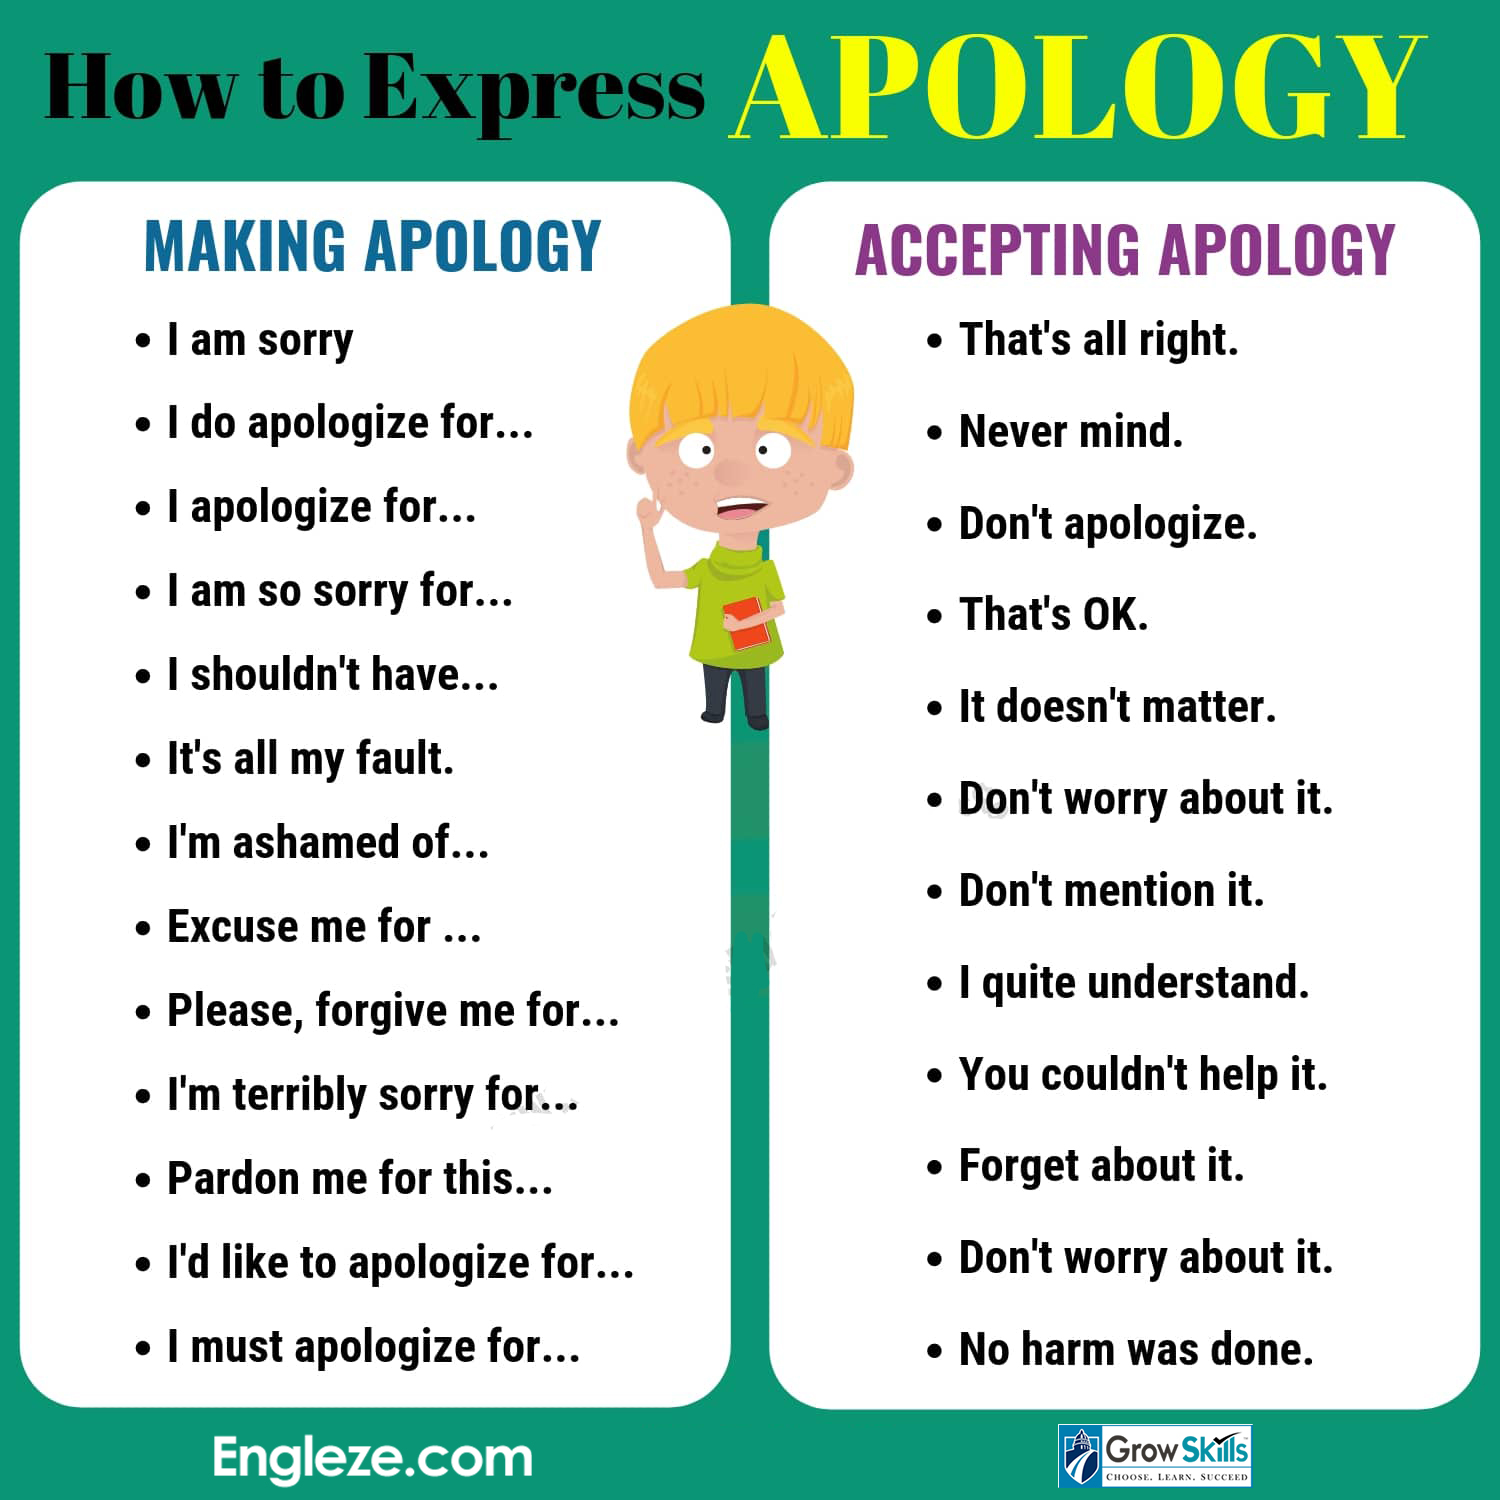 Linking activities. How to apologize. How to apologize in English. Ways to say sorry. How to say sorry in English.